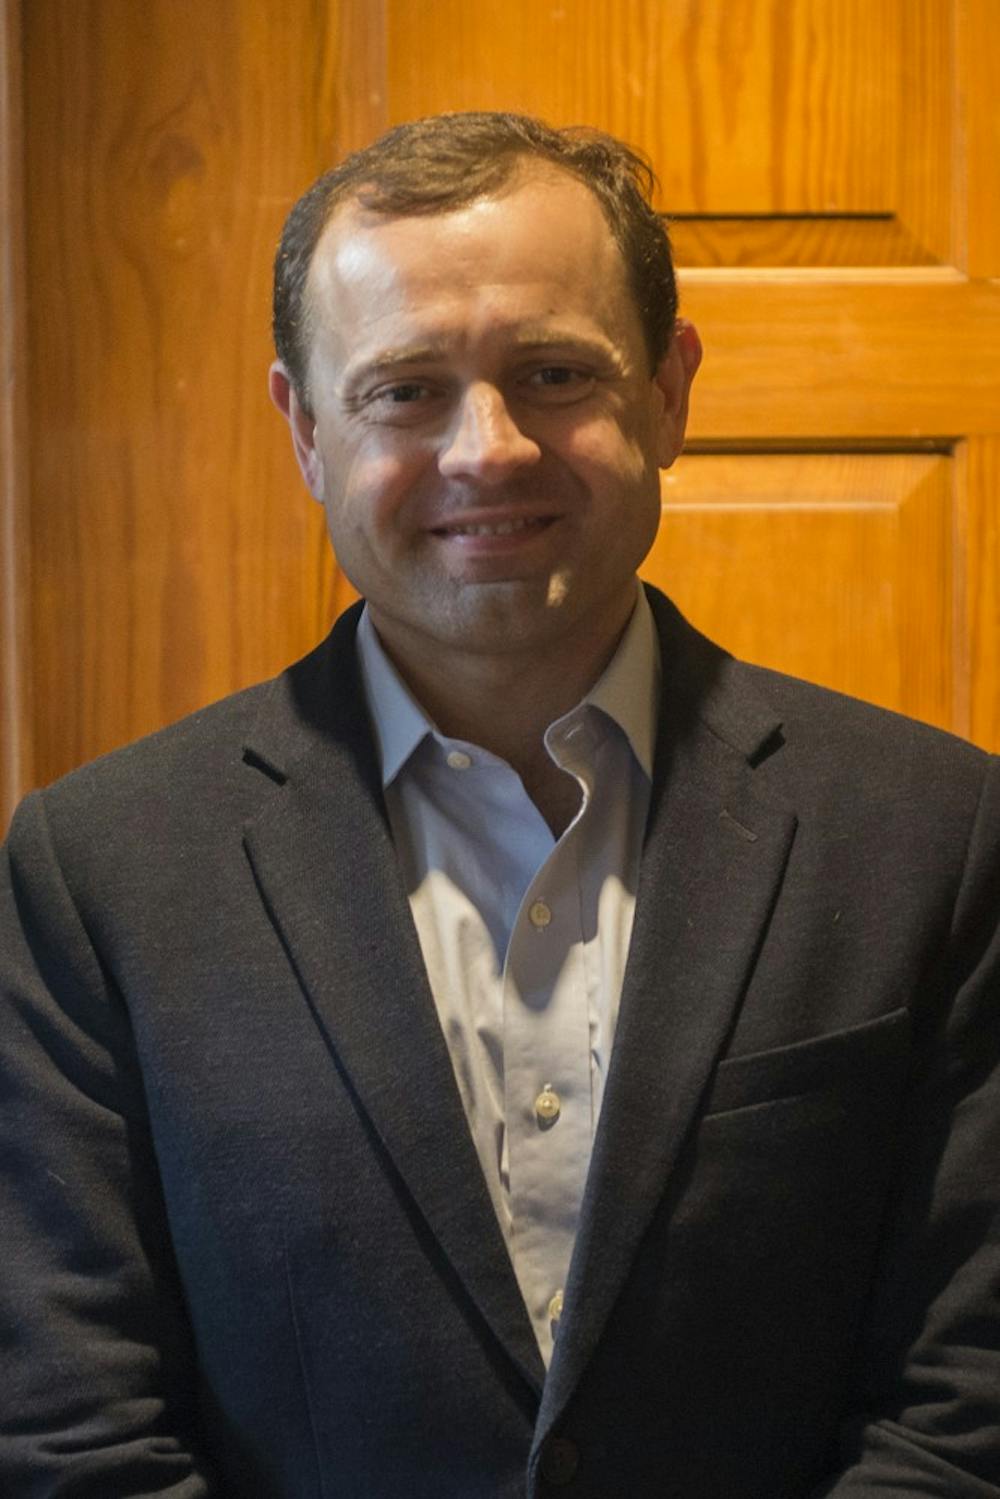 <p>Tom Perriello is a gubernatorial candidate campaigning for the Democratic Party’s nomination.</p>